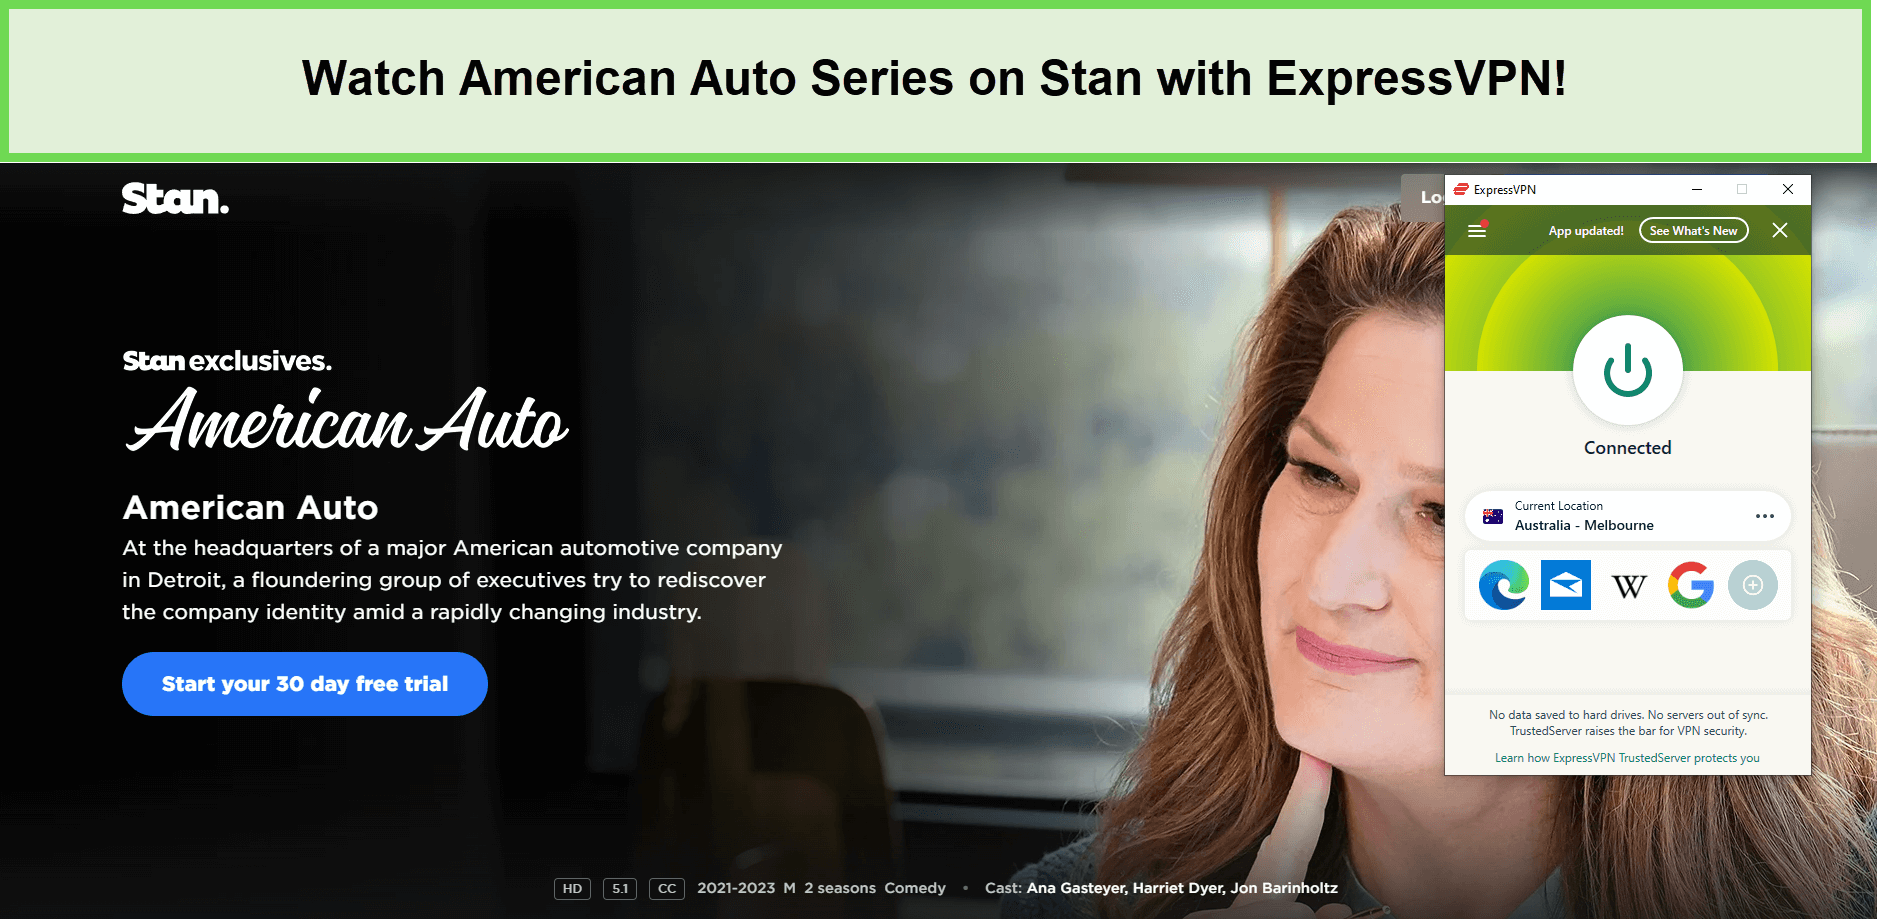 Watch-American-Auto-Series-outside-Australia-on-Stan-with-ExpressVPN